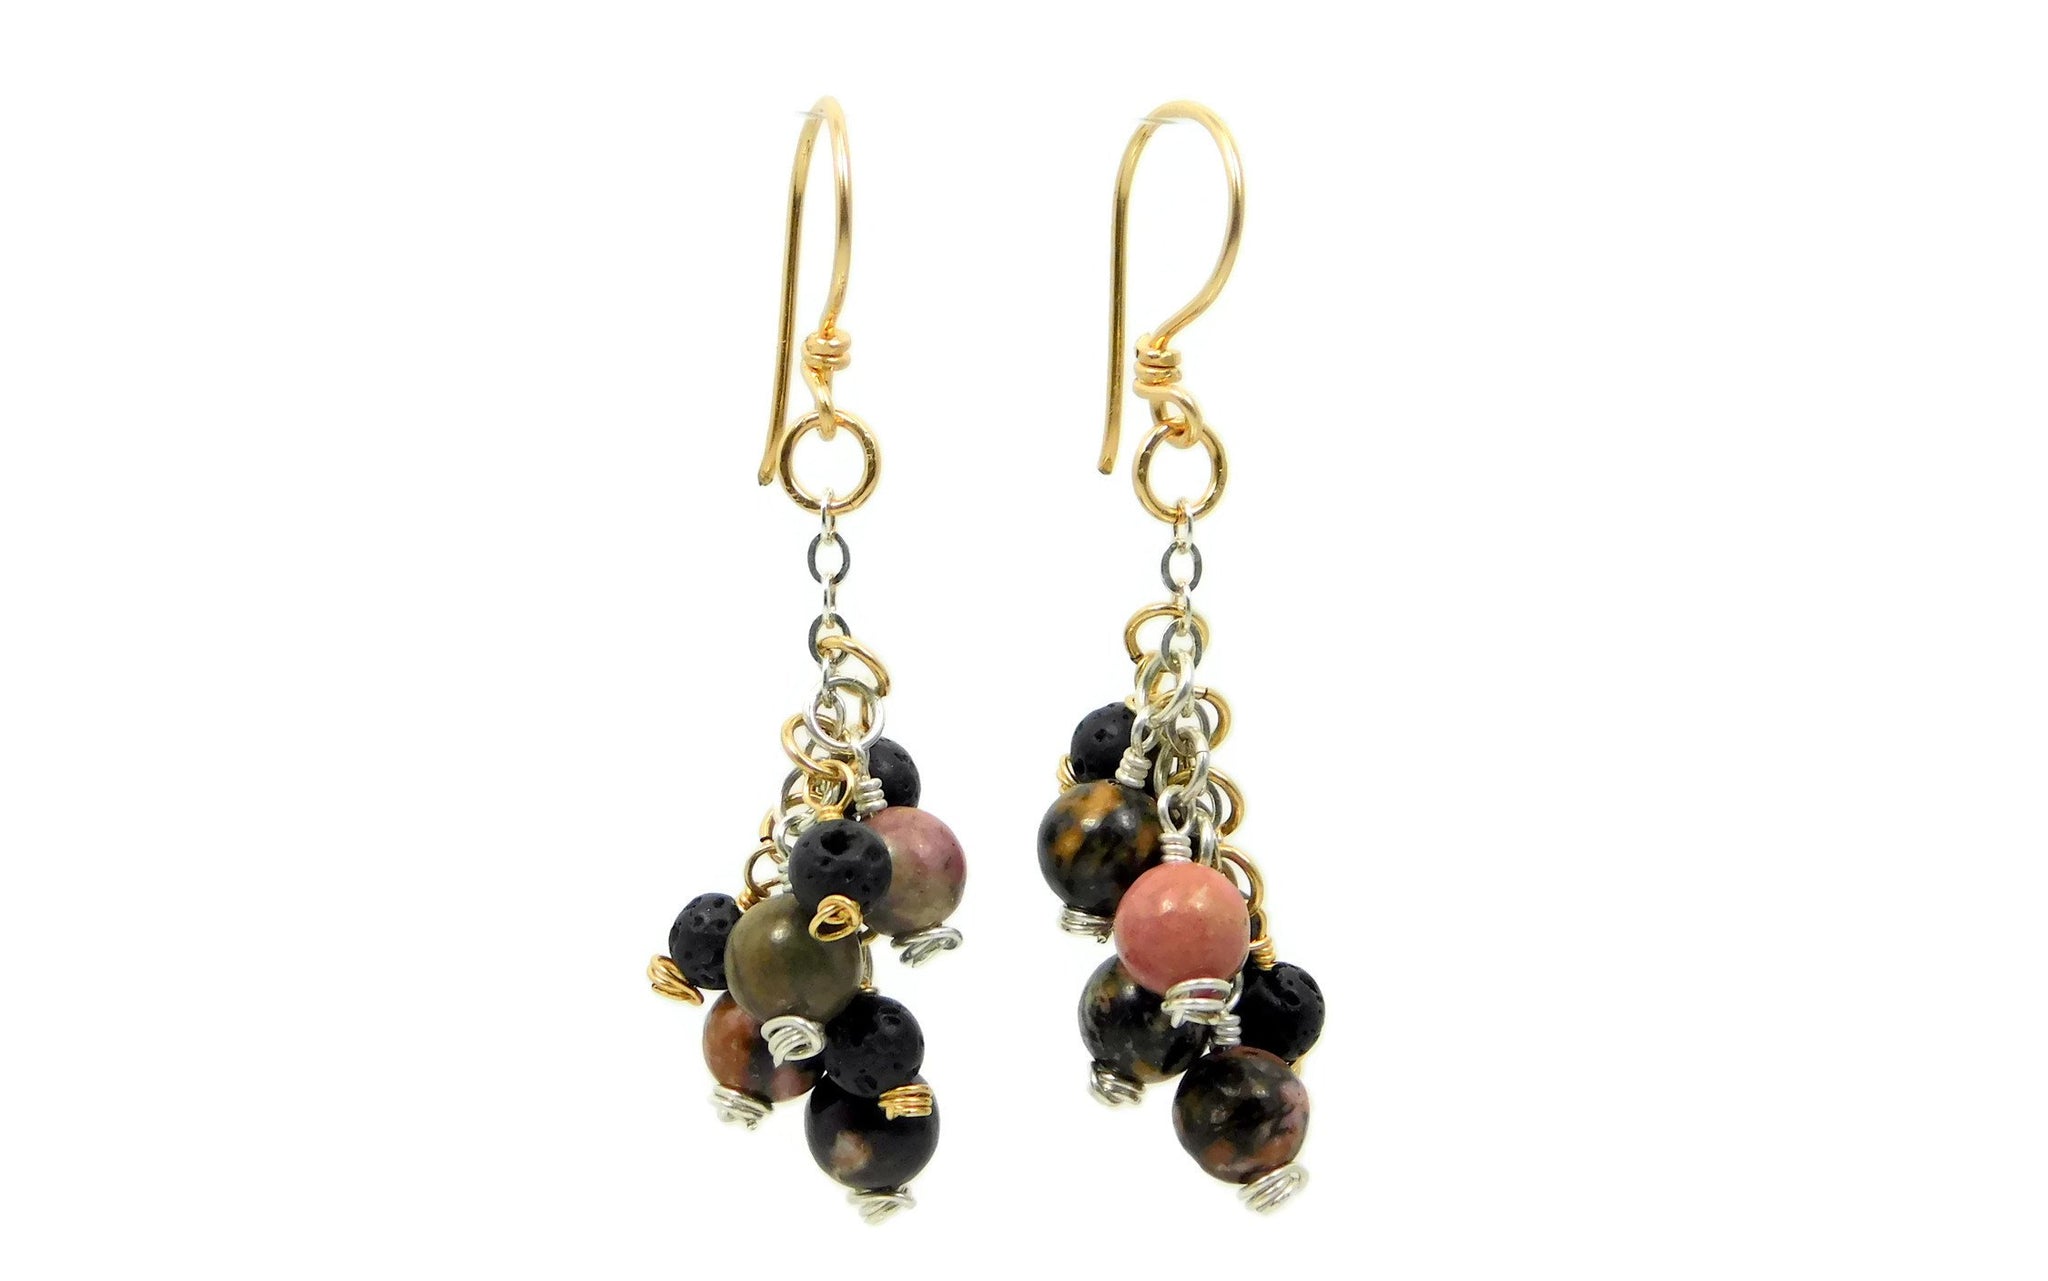 Rhodonite and Lava Stone earrings in sterling silver and 14kt gold fill cold fusion jewelry gold and silver jewelry handmade silver jewelry sterling silver jewelry artisan jewelry handmade gemstone jewelry one of a kind jewelry unique jewelry